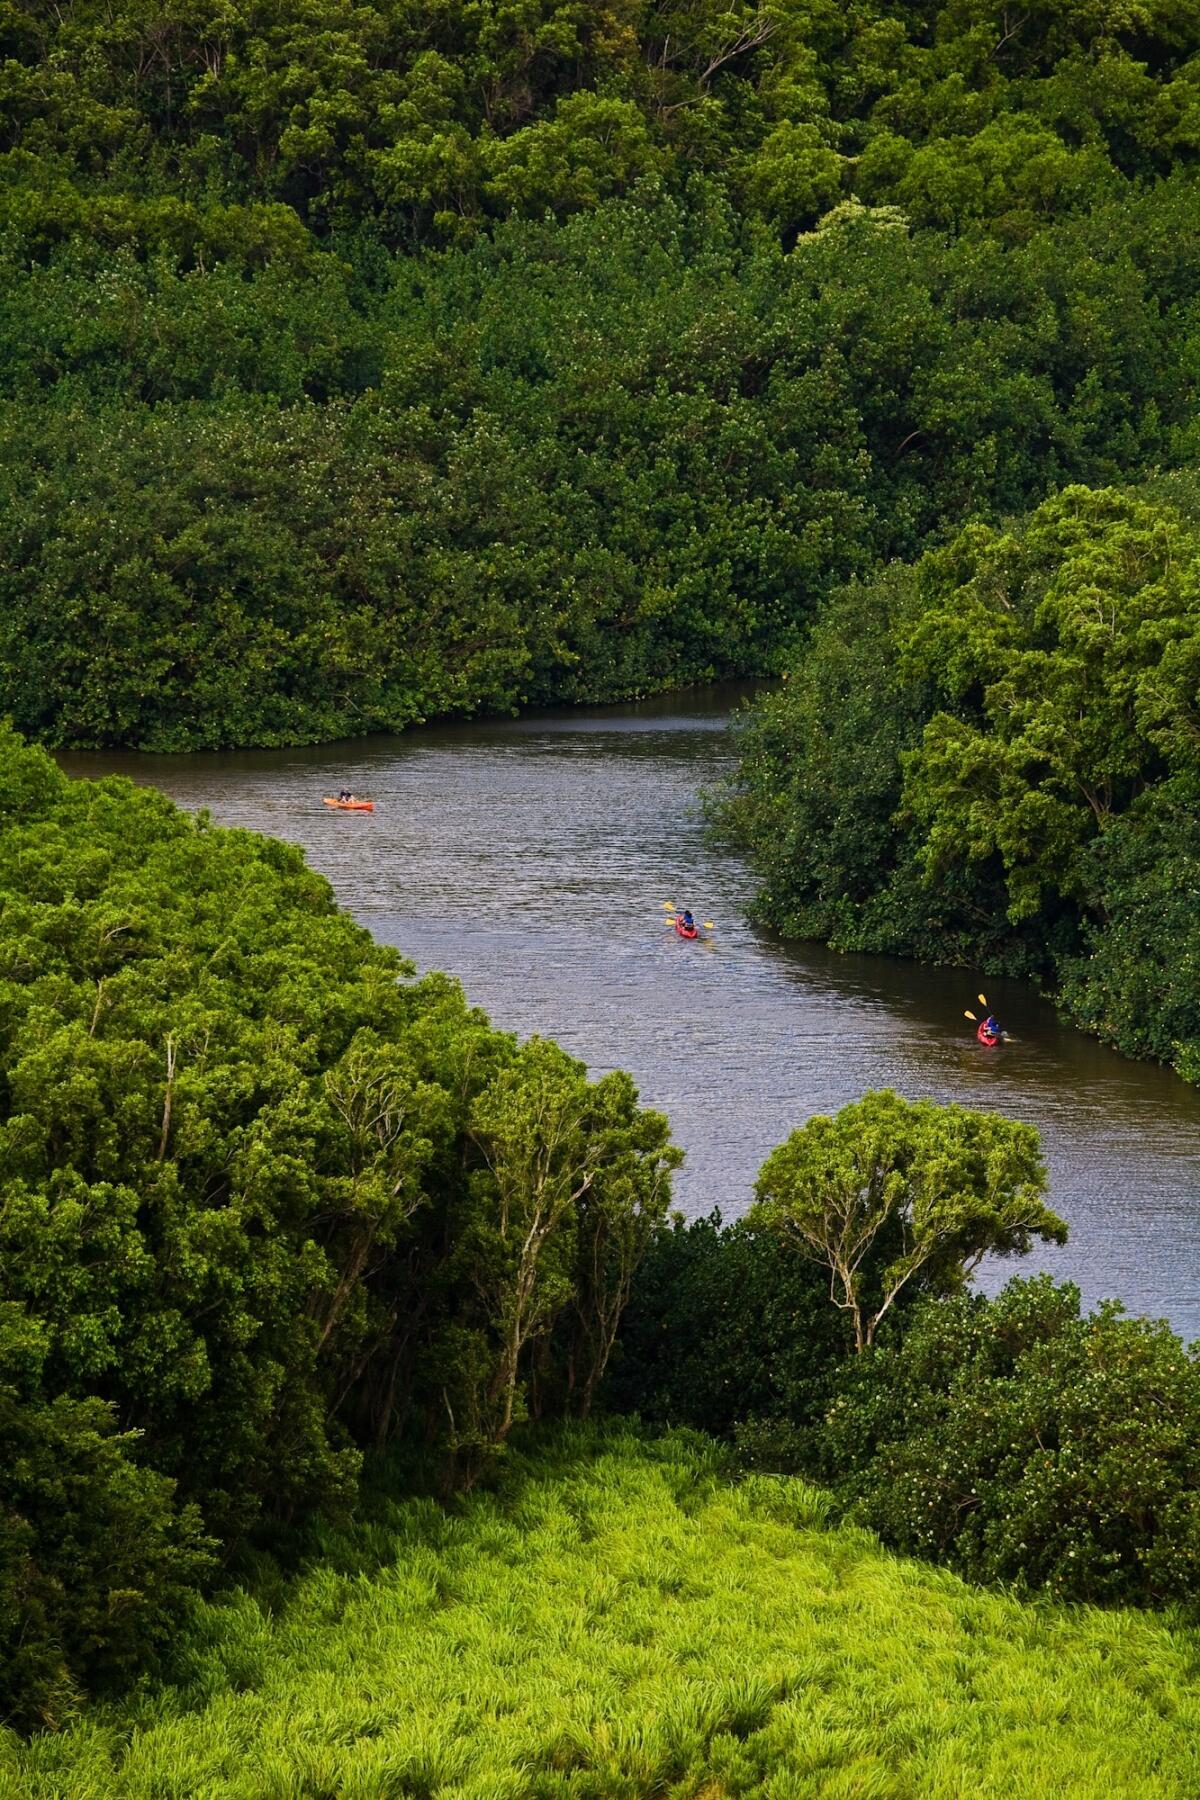 The Wailea River, Hawaii's longest, provides excellent opportunities for canoeing and kayaking.